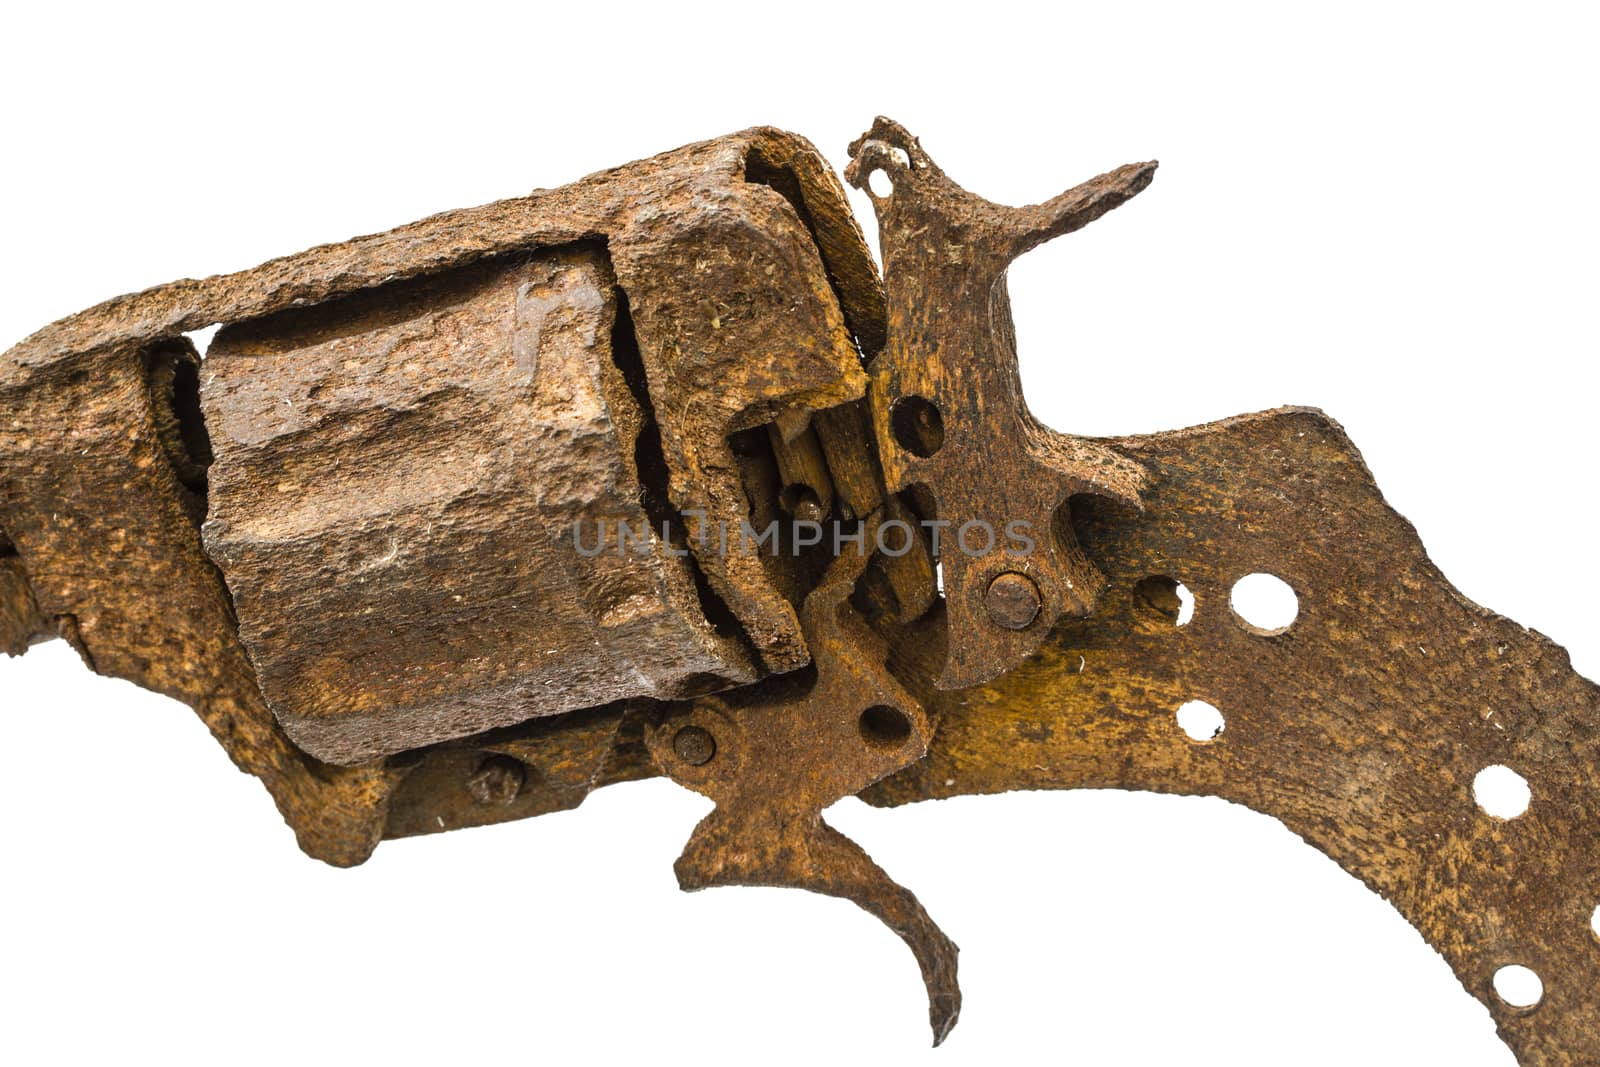 Old rusty pistol close-up, Isolated on white background by kostiuchenko